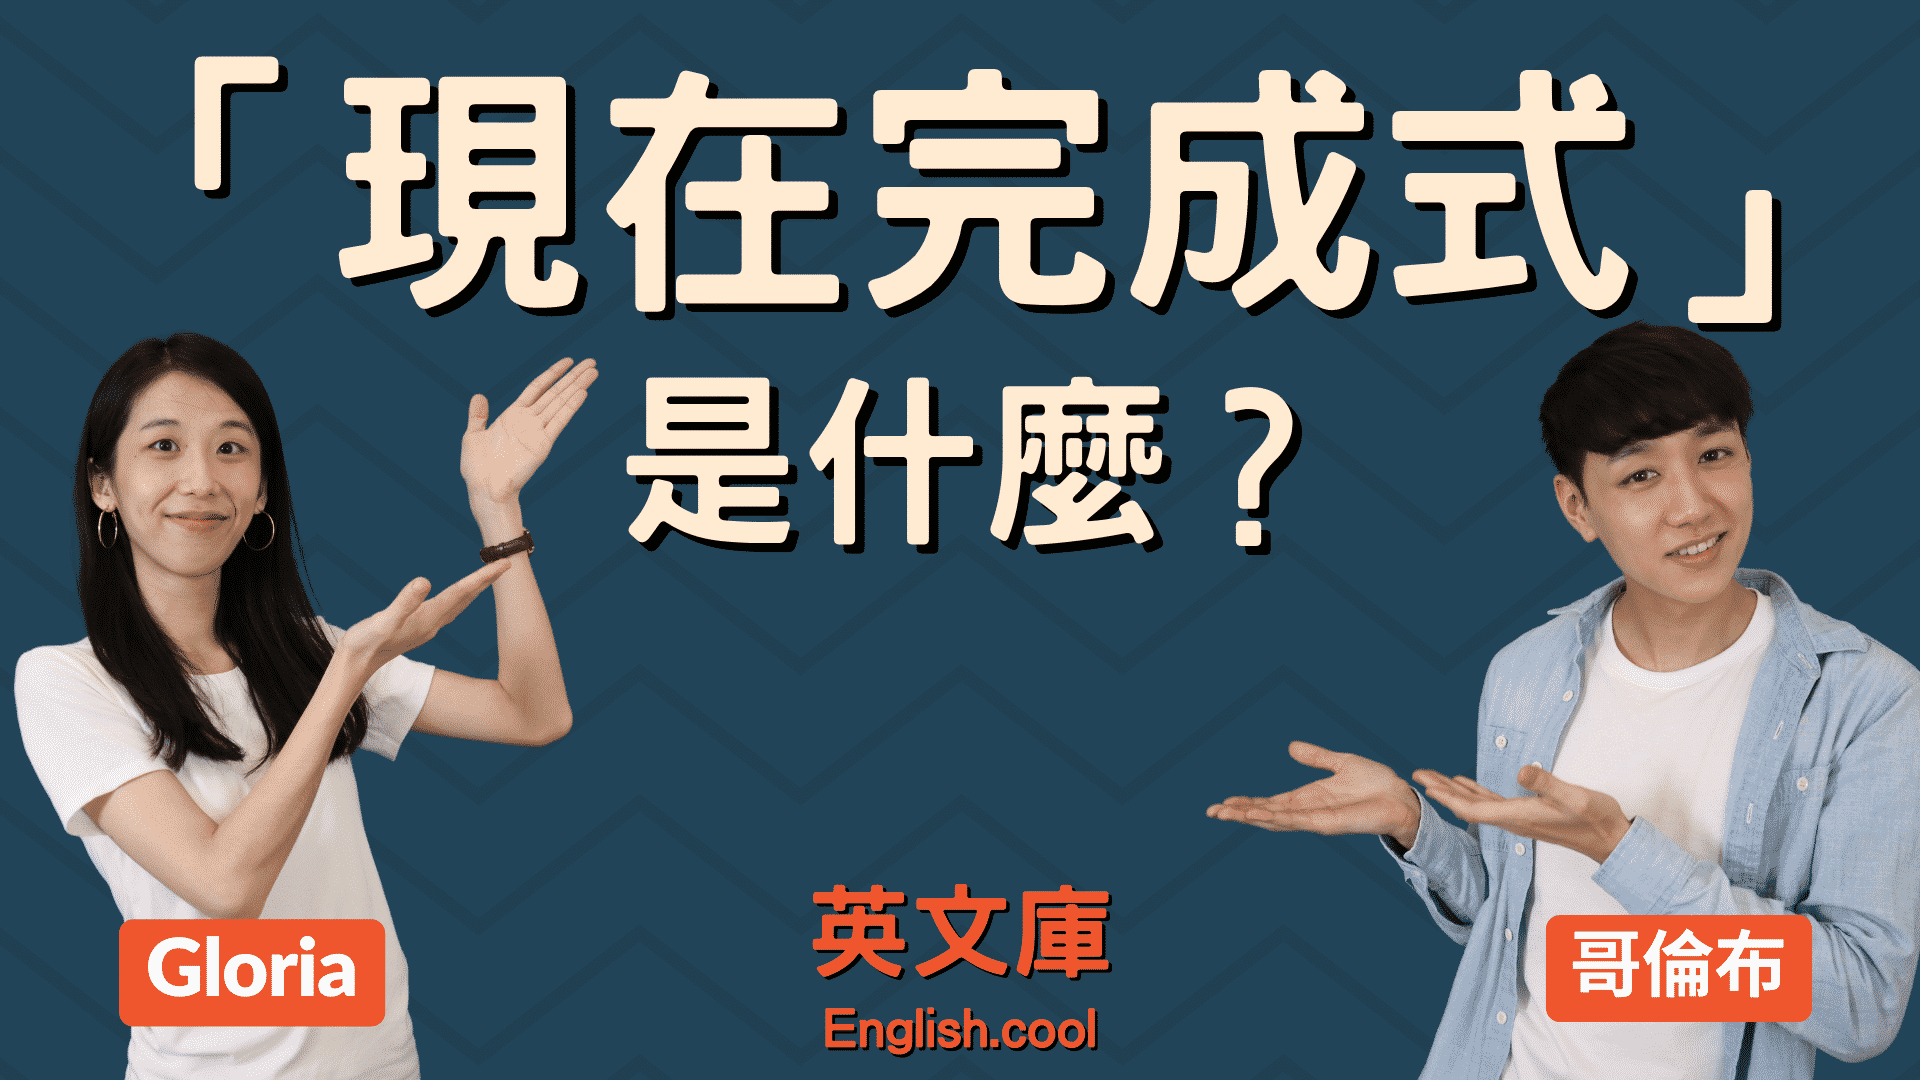 You are currently viewing 「現在完成式」 (Present Perfect) 是什麼？來看解釋、例句！